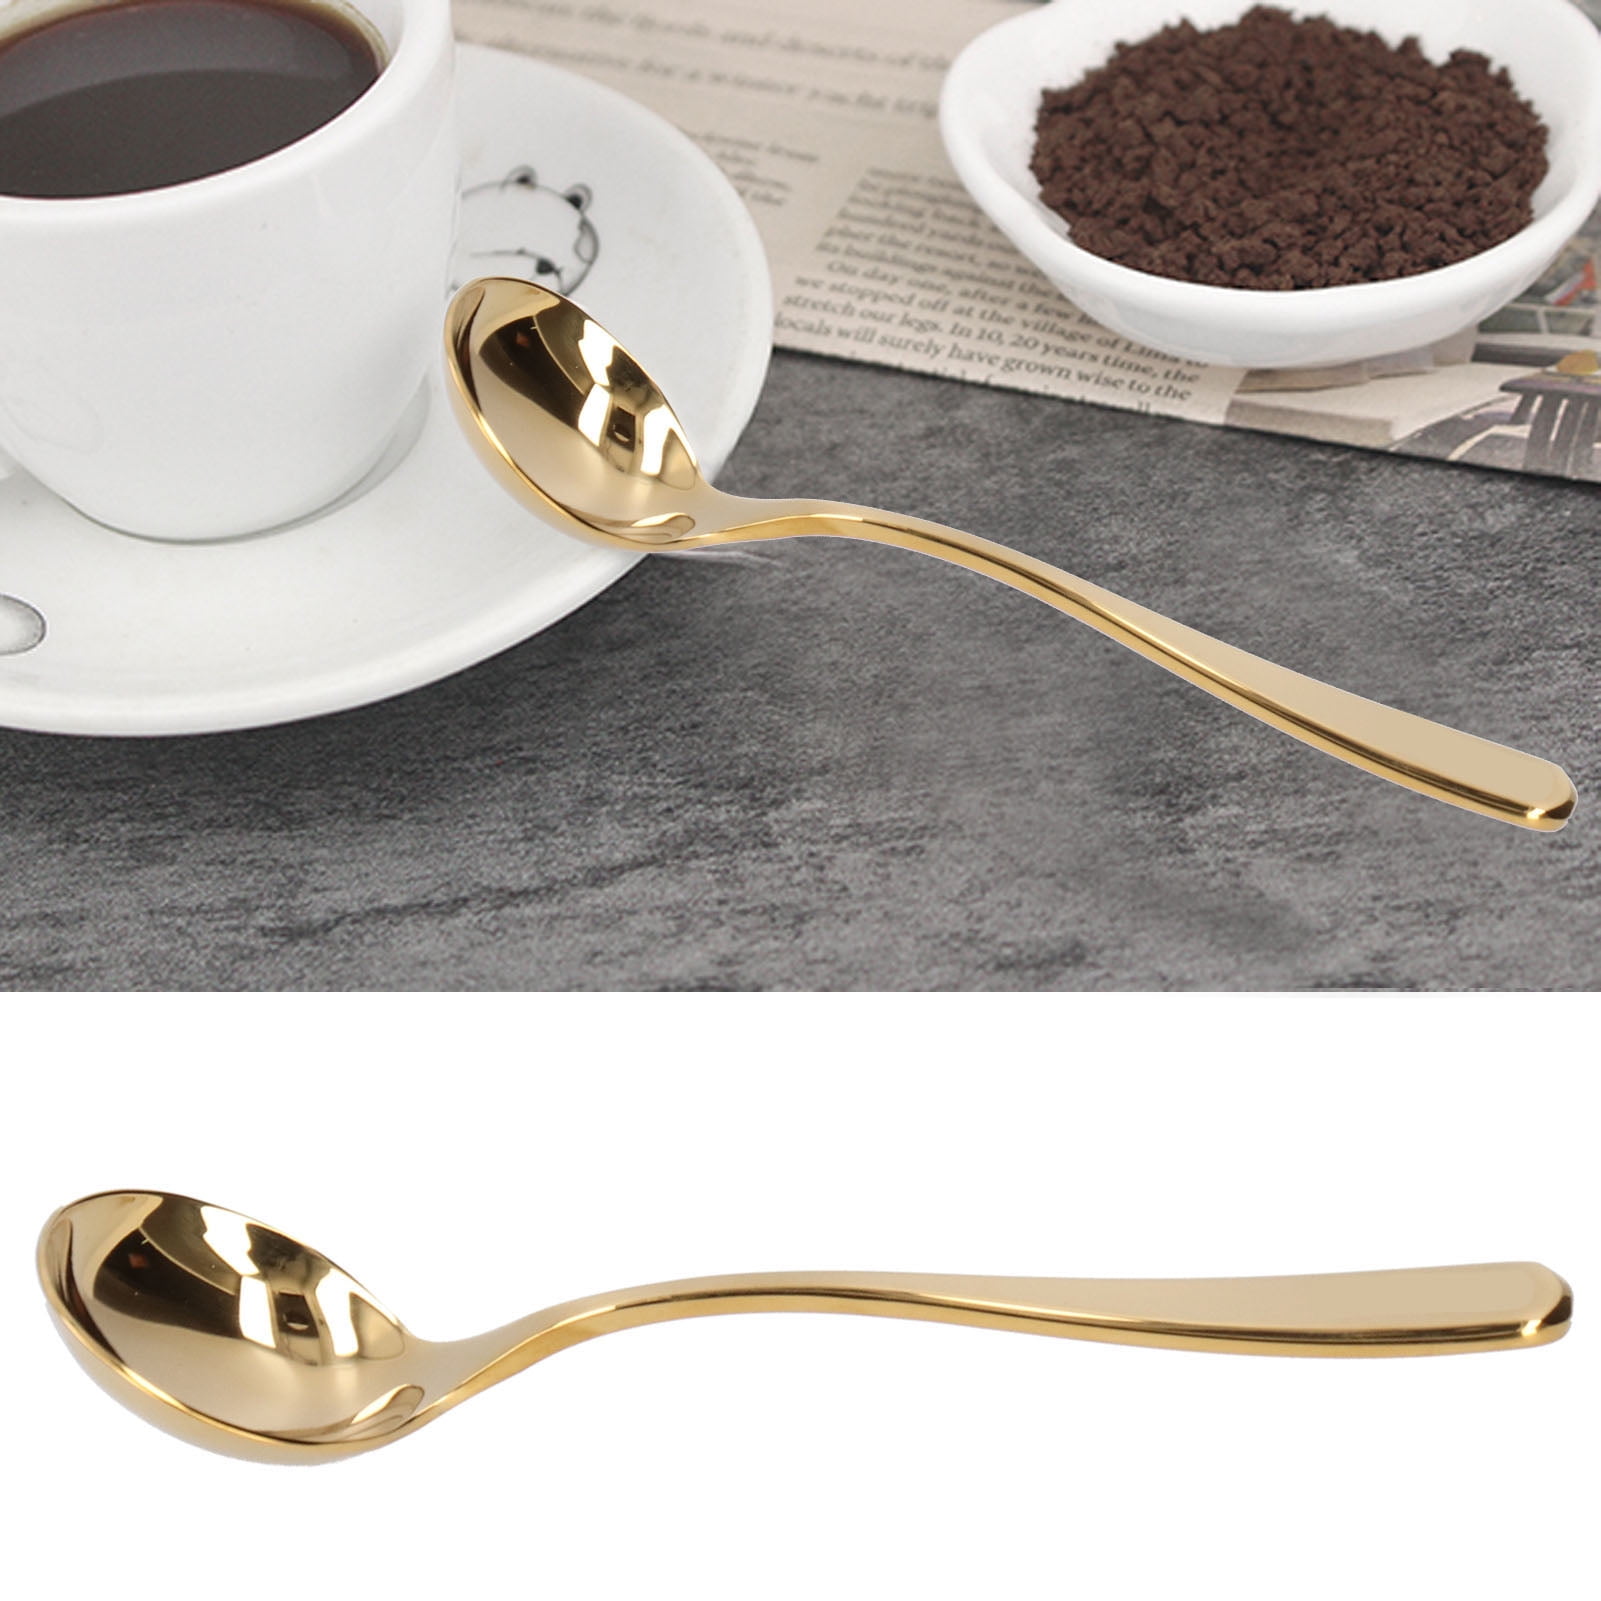 Cupping Spoon [NO SHIPPING!] – CoffeeMind